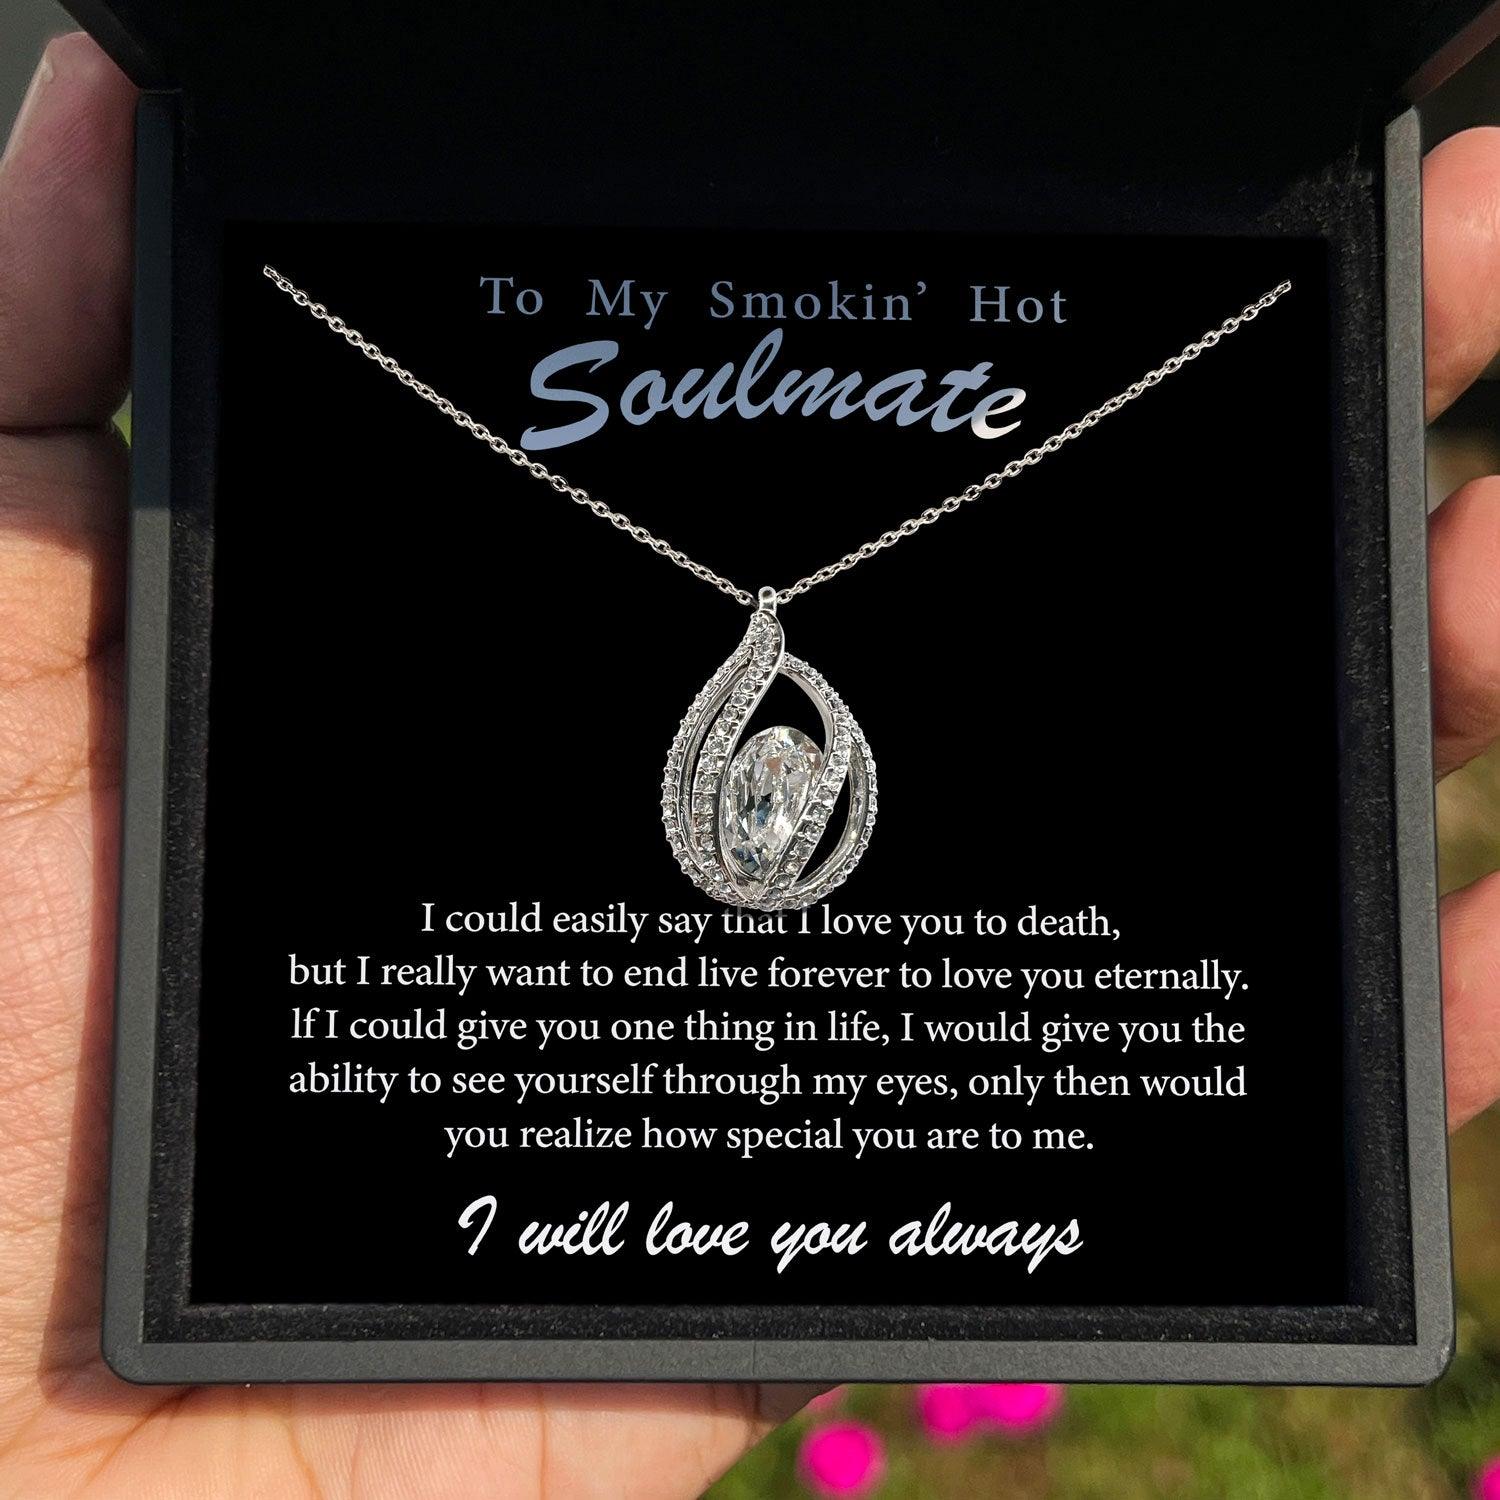 To My Smokin' Hot Soulmate - I Really Want To End Life Forever To Love You Eternally - Orbital Birdcage Necklace - TRYNDI